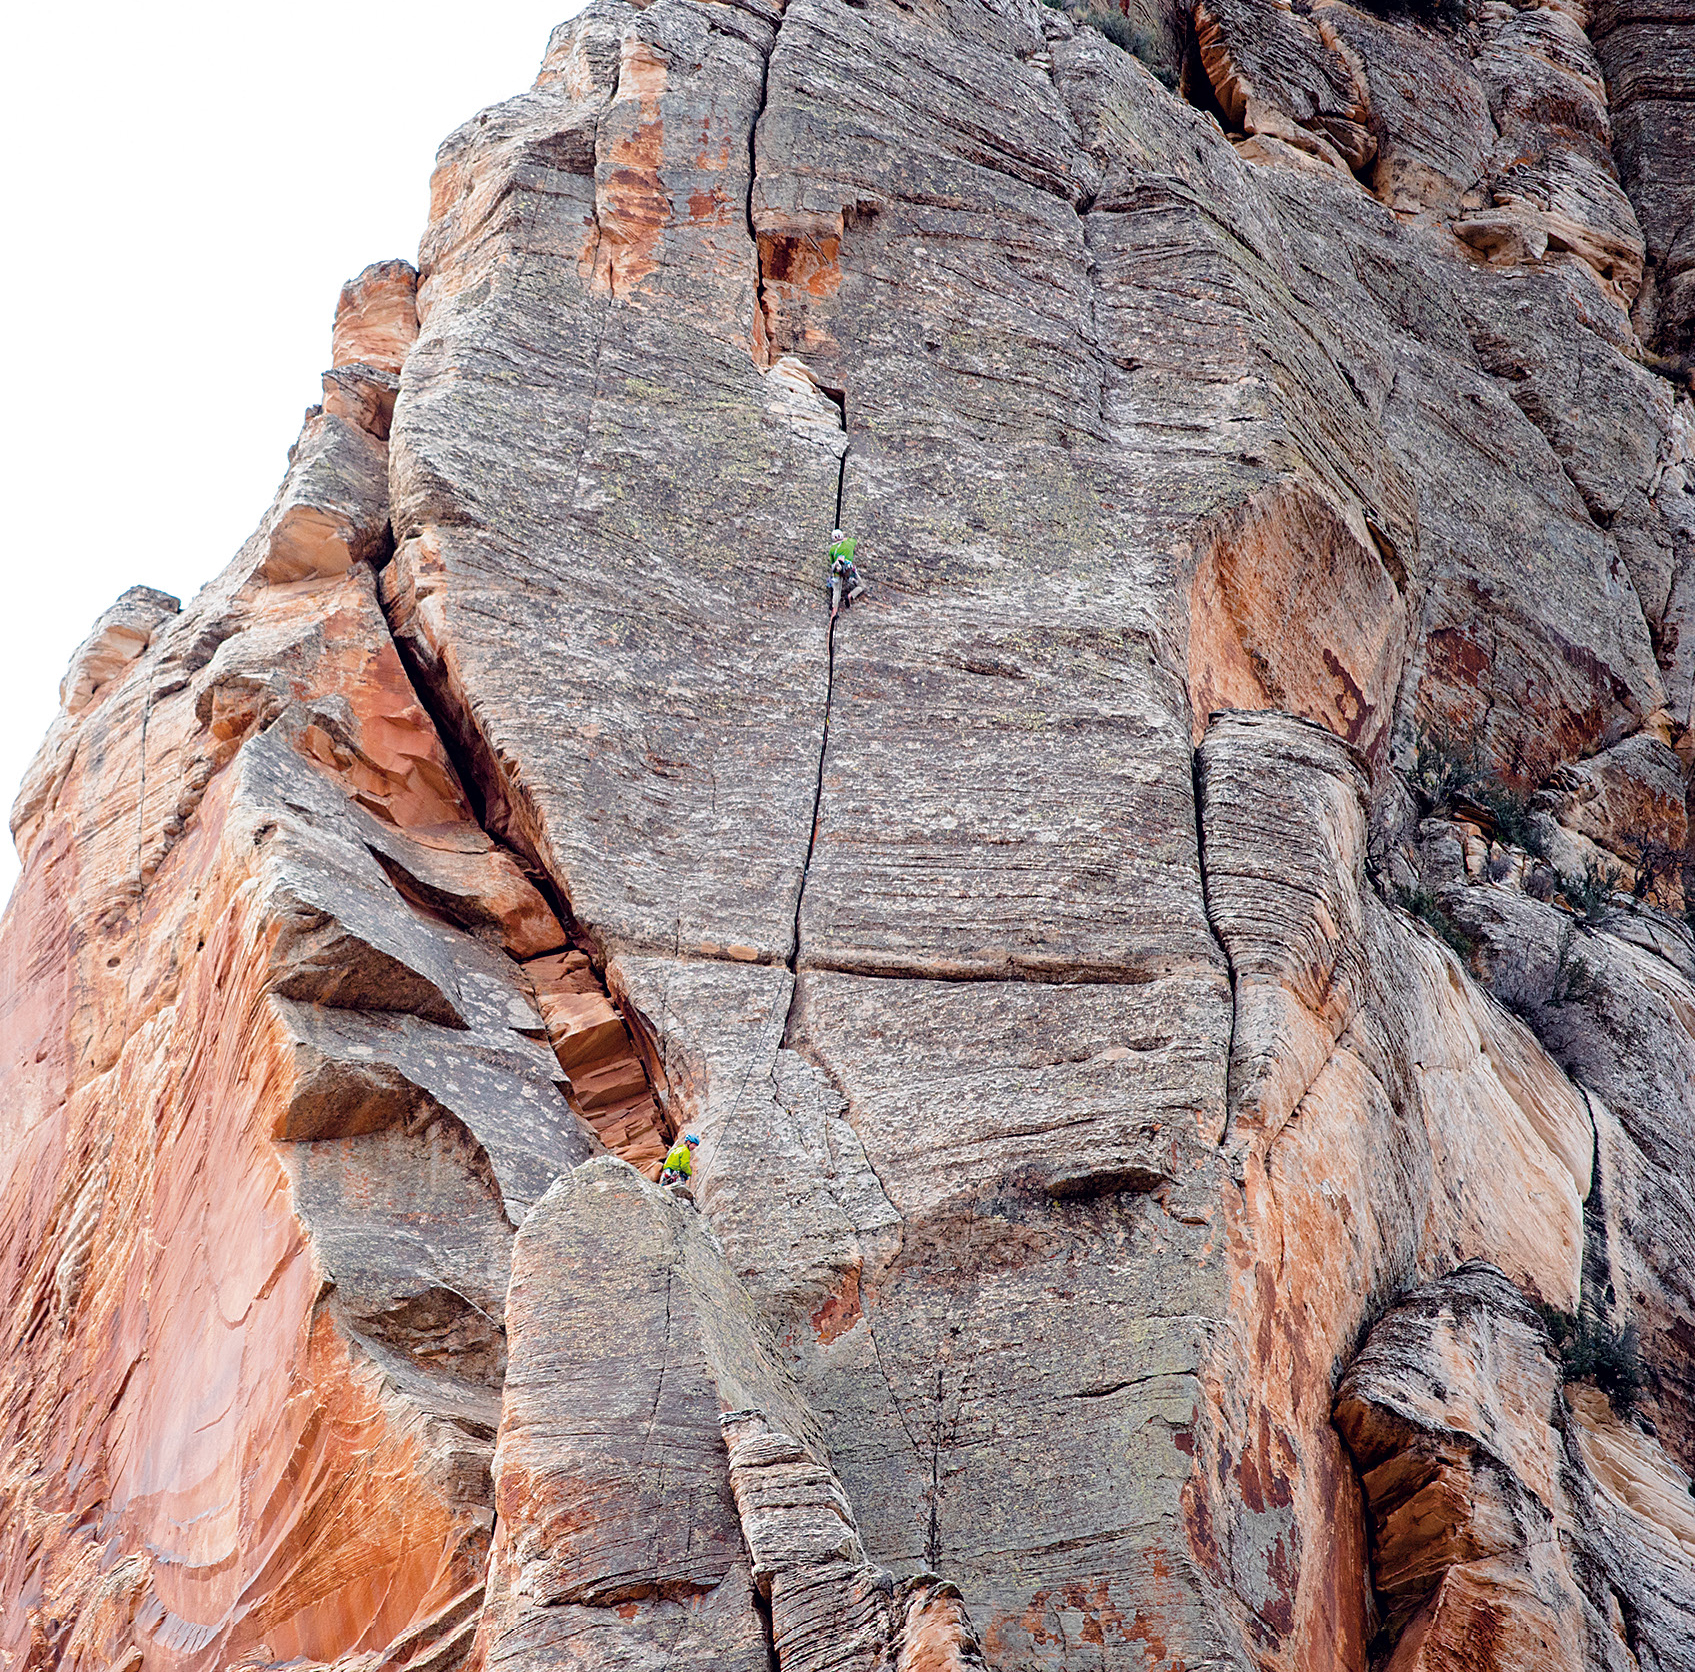 Snyder and Harrison on Screaming Sky Crack, Zoroaster Temple. [Photo] Blake McCord